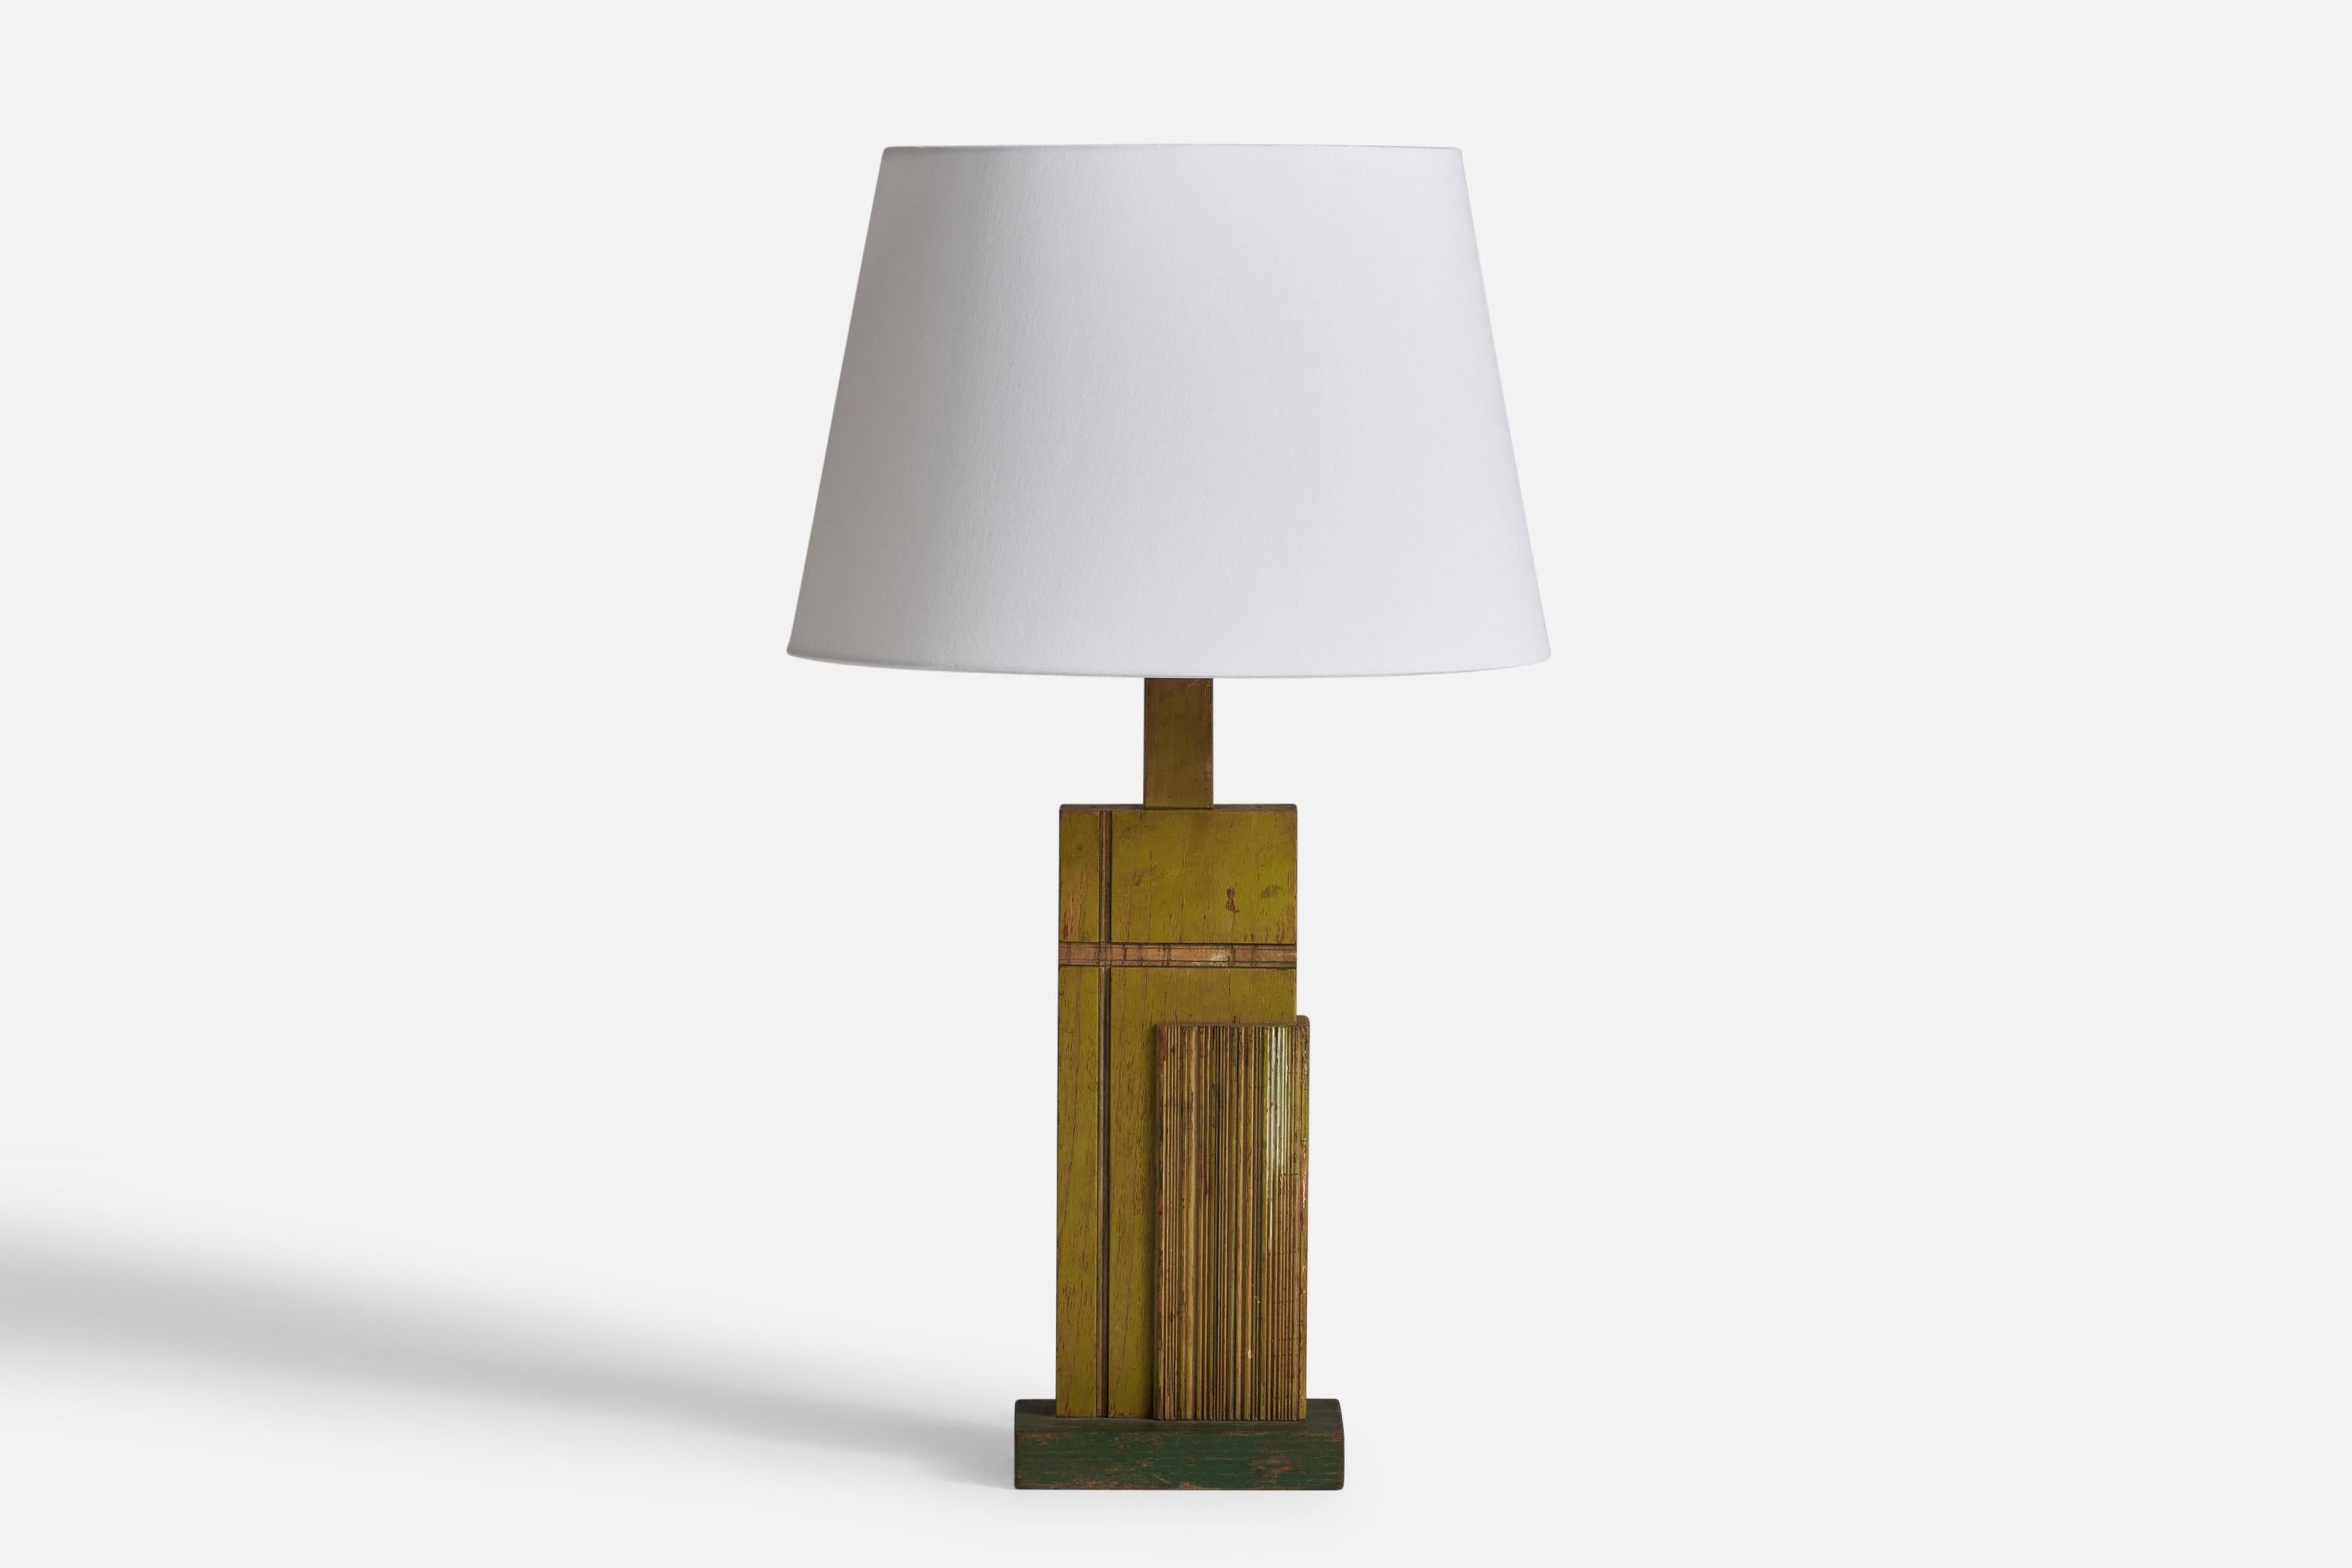 A green and gold-painted wood table lamp designed and produced in the US, c. 1950s.

Dimensions of Lamp (inches): 28” H x 4.1” Diameter
Dimensions of Shade (inches): 12”  Top Diameter x 16” Bottom Diameter x 10.5” H
Dimensions of Lamp with Shade